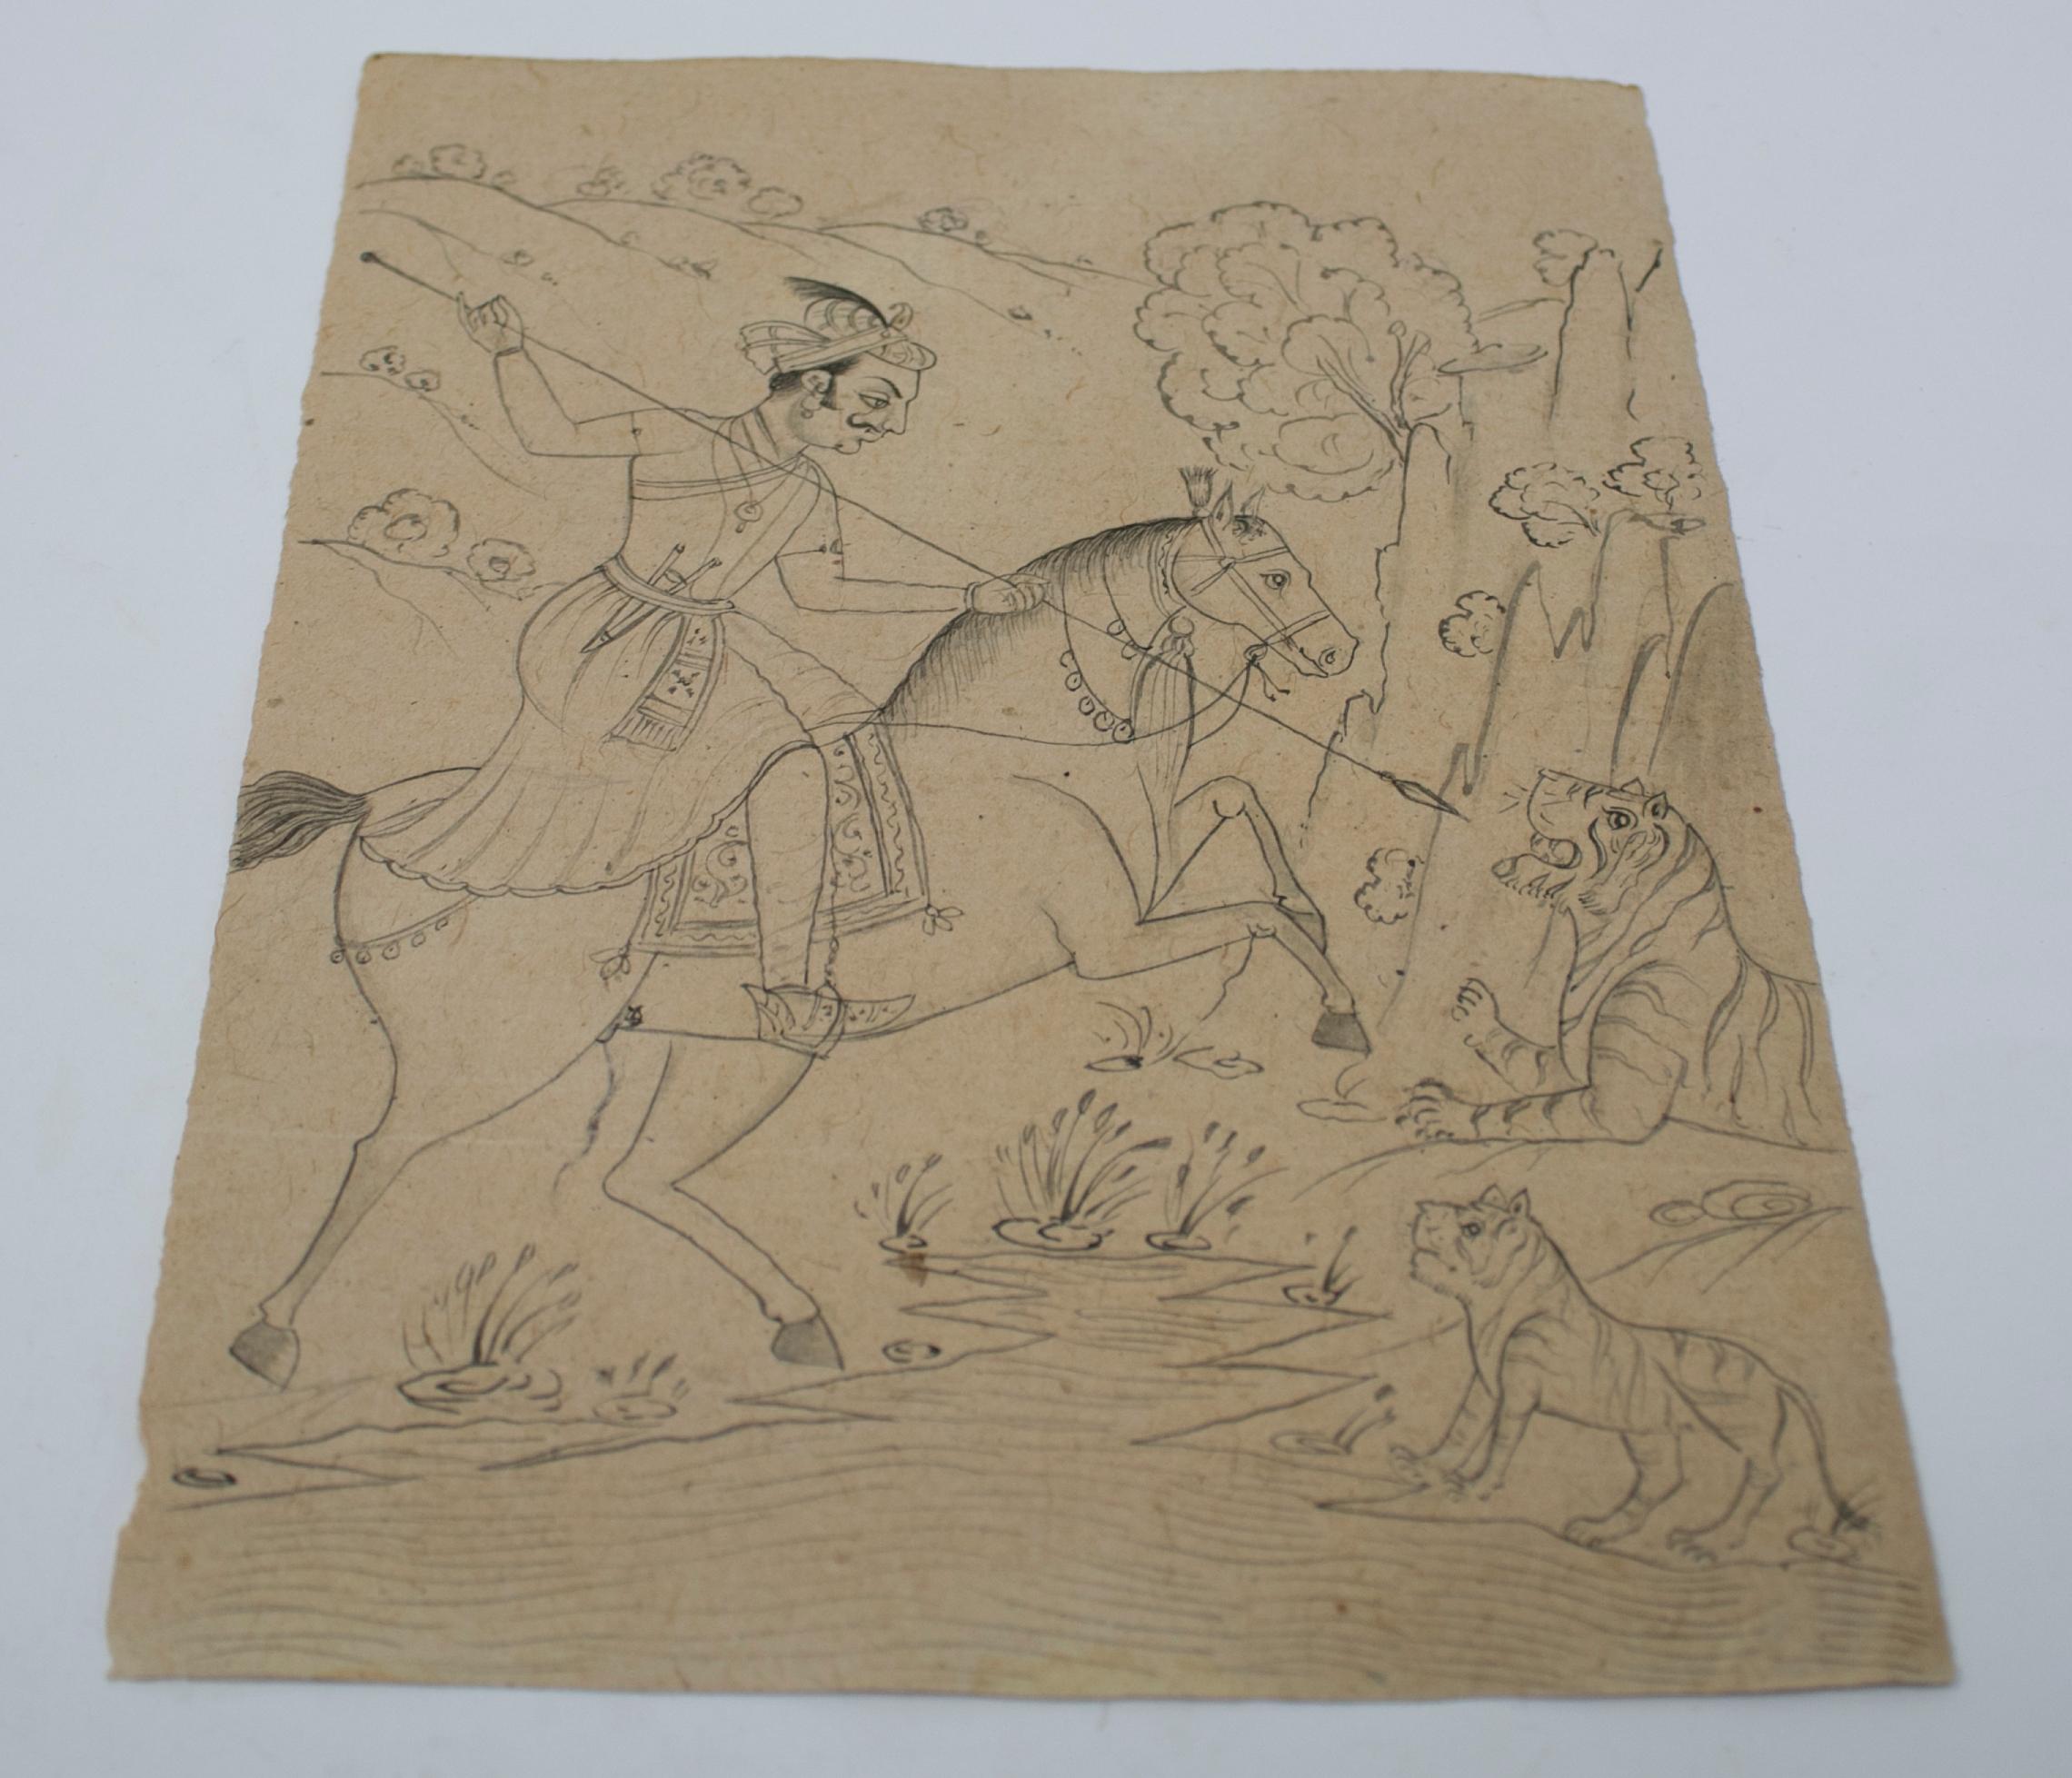 1970s Indian paper drawing of a horse rider hunting a tiger with spear. Part of a large private drawing collection.